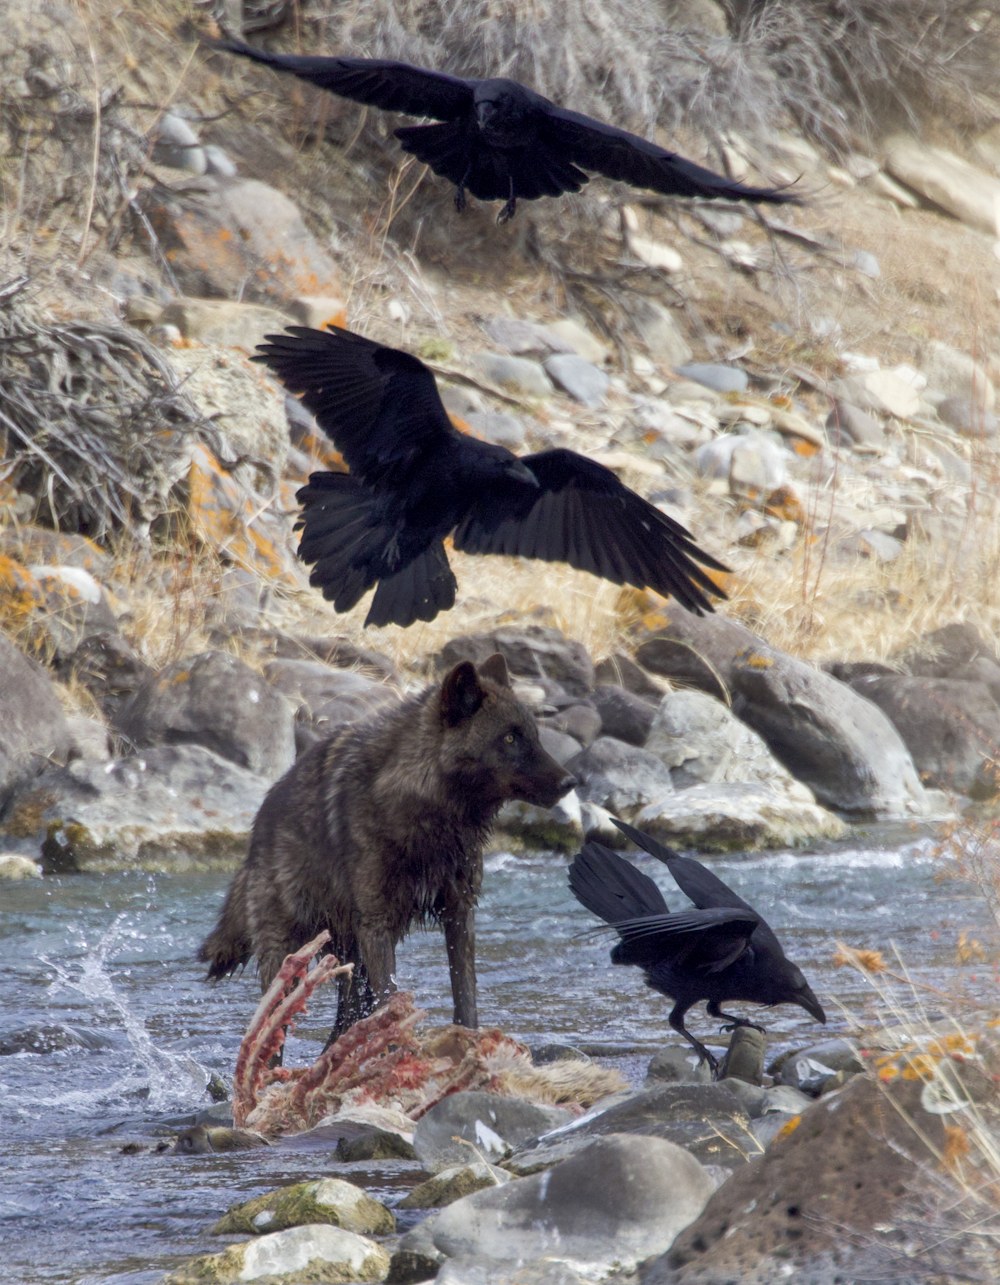 Ravens and a Black Wolf